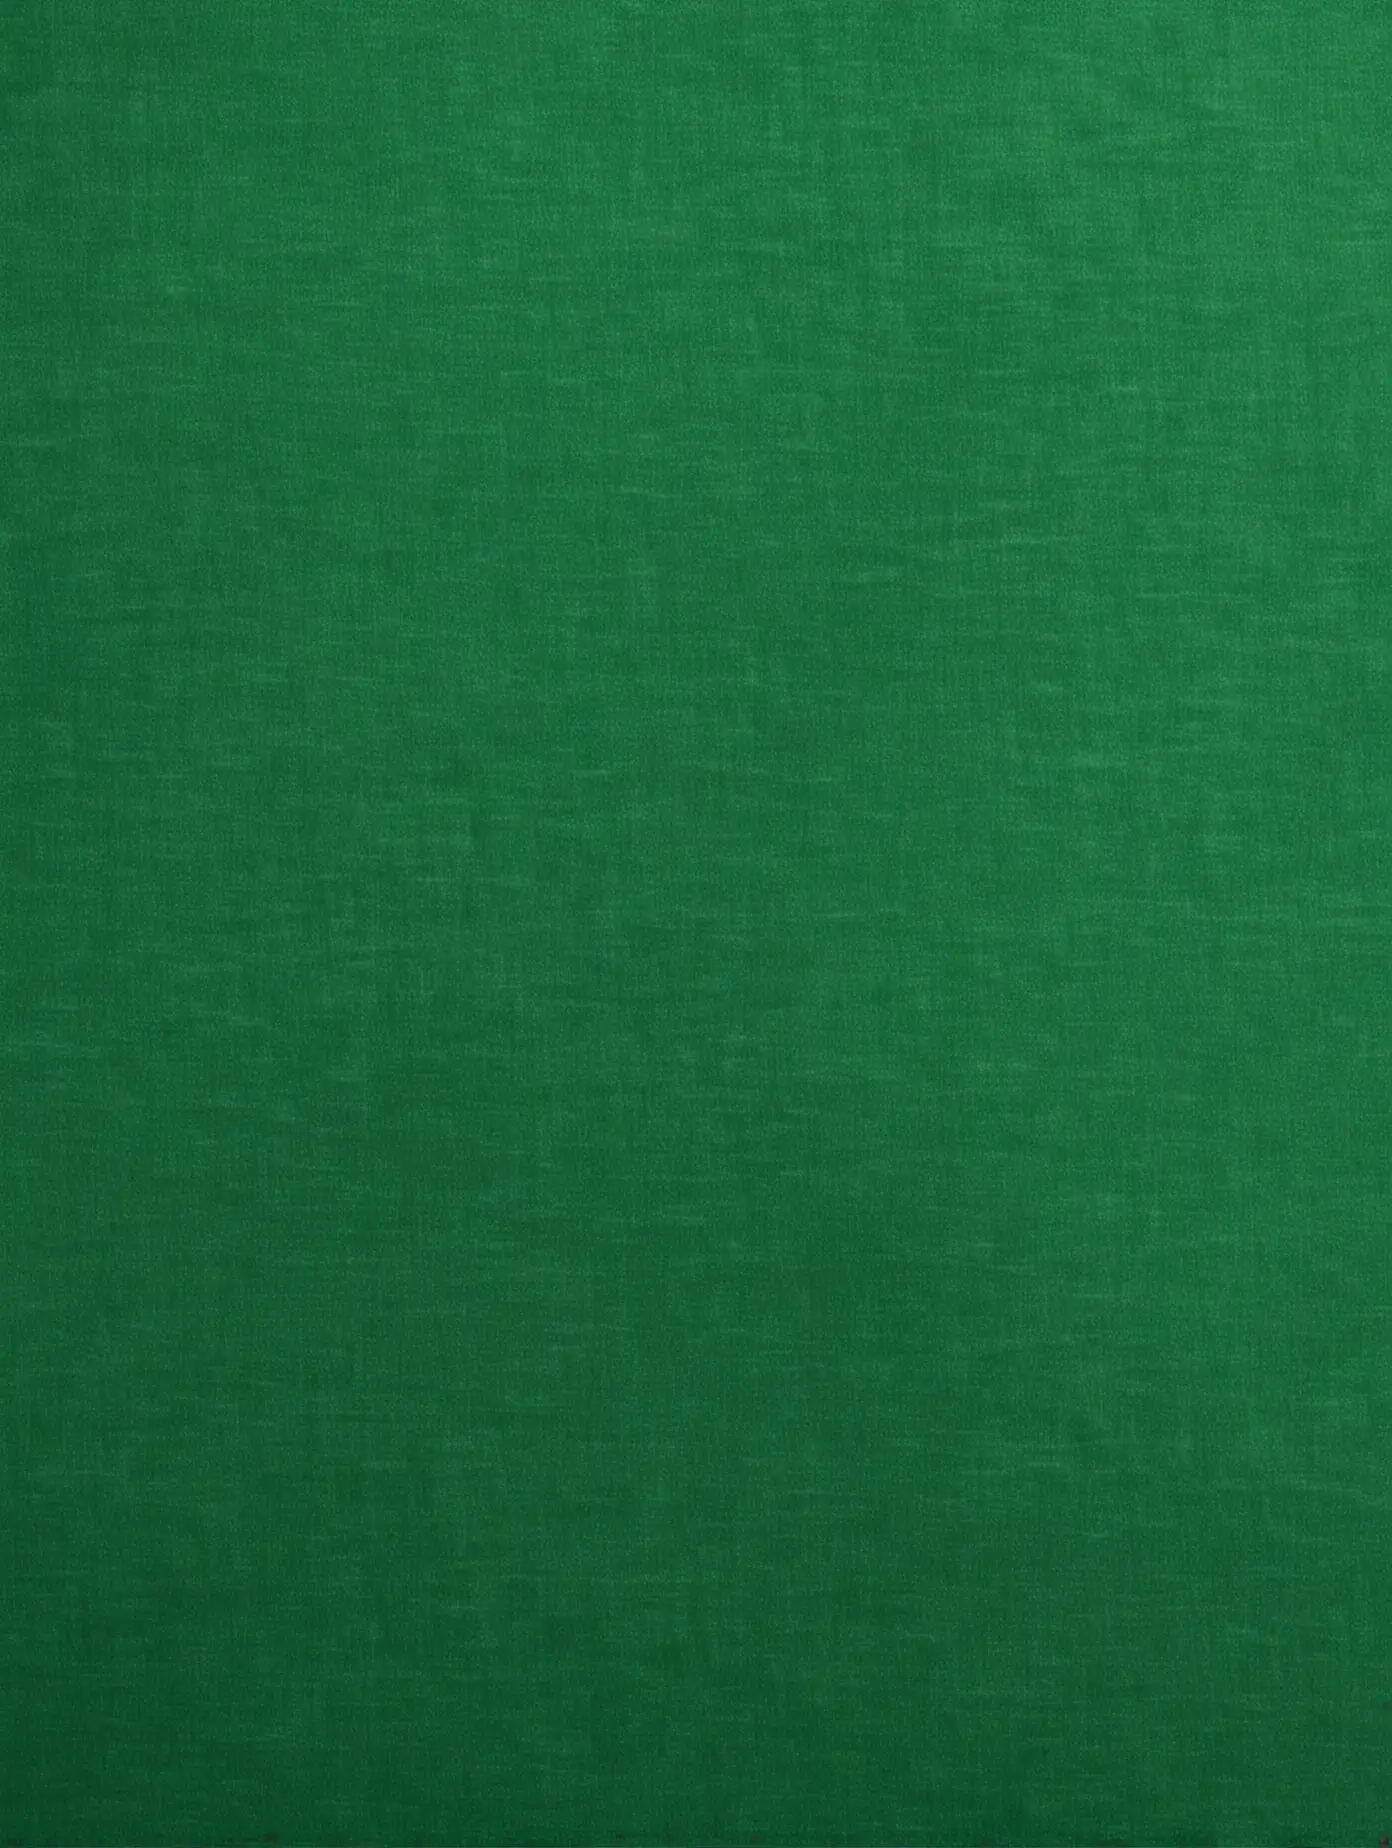 Emerald Green Background with Shimmering Texture